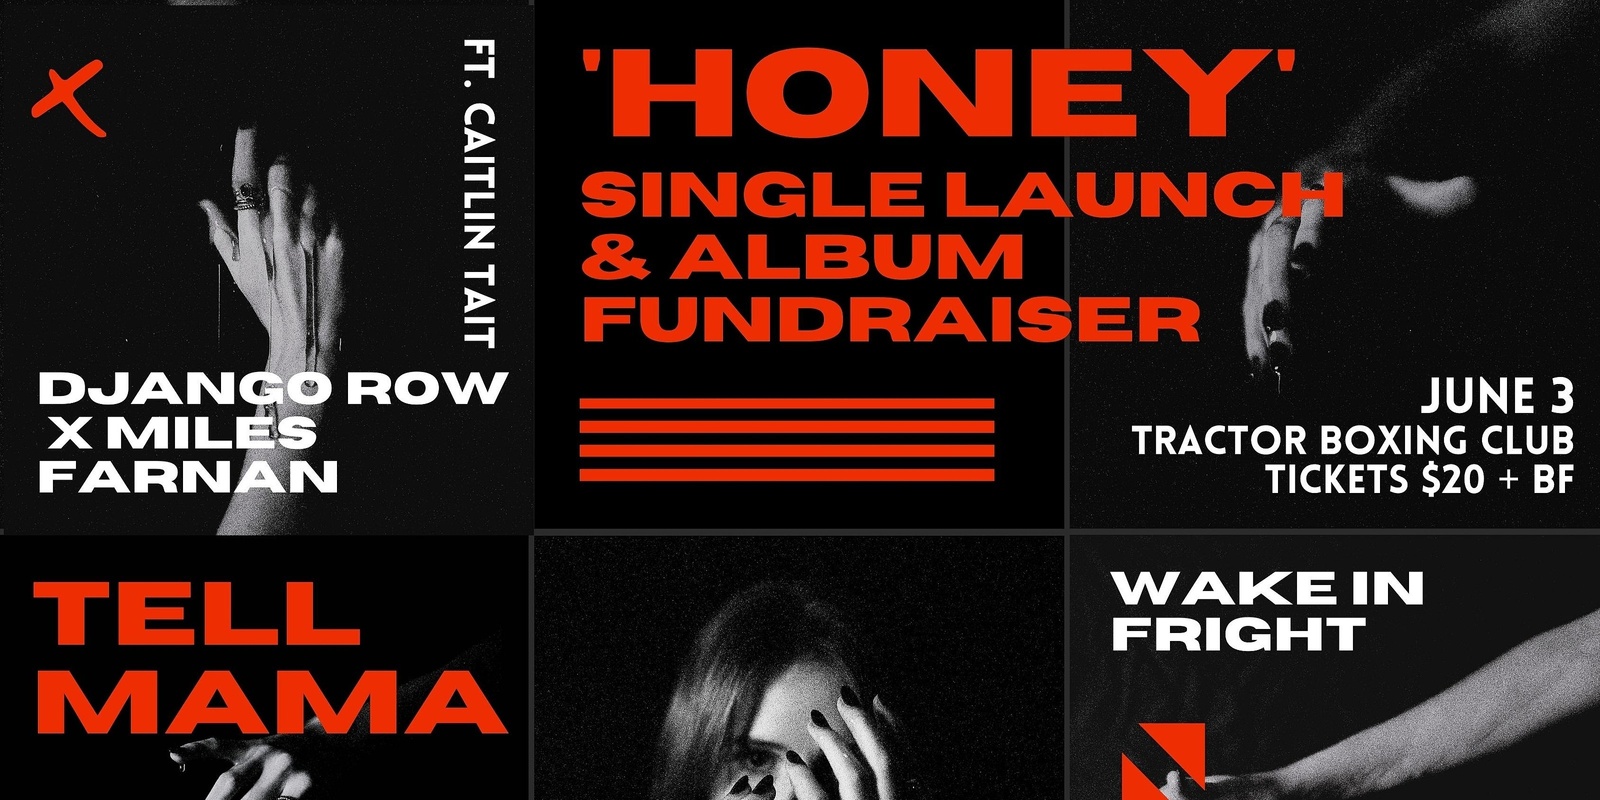 Banner image for Tell Mama 'HONEY' single launch & album fundraiser // TRACTOR BOXING CLUB